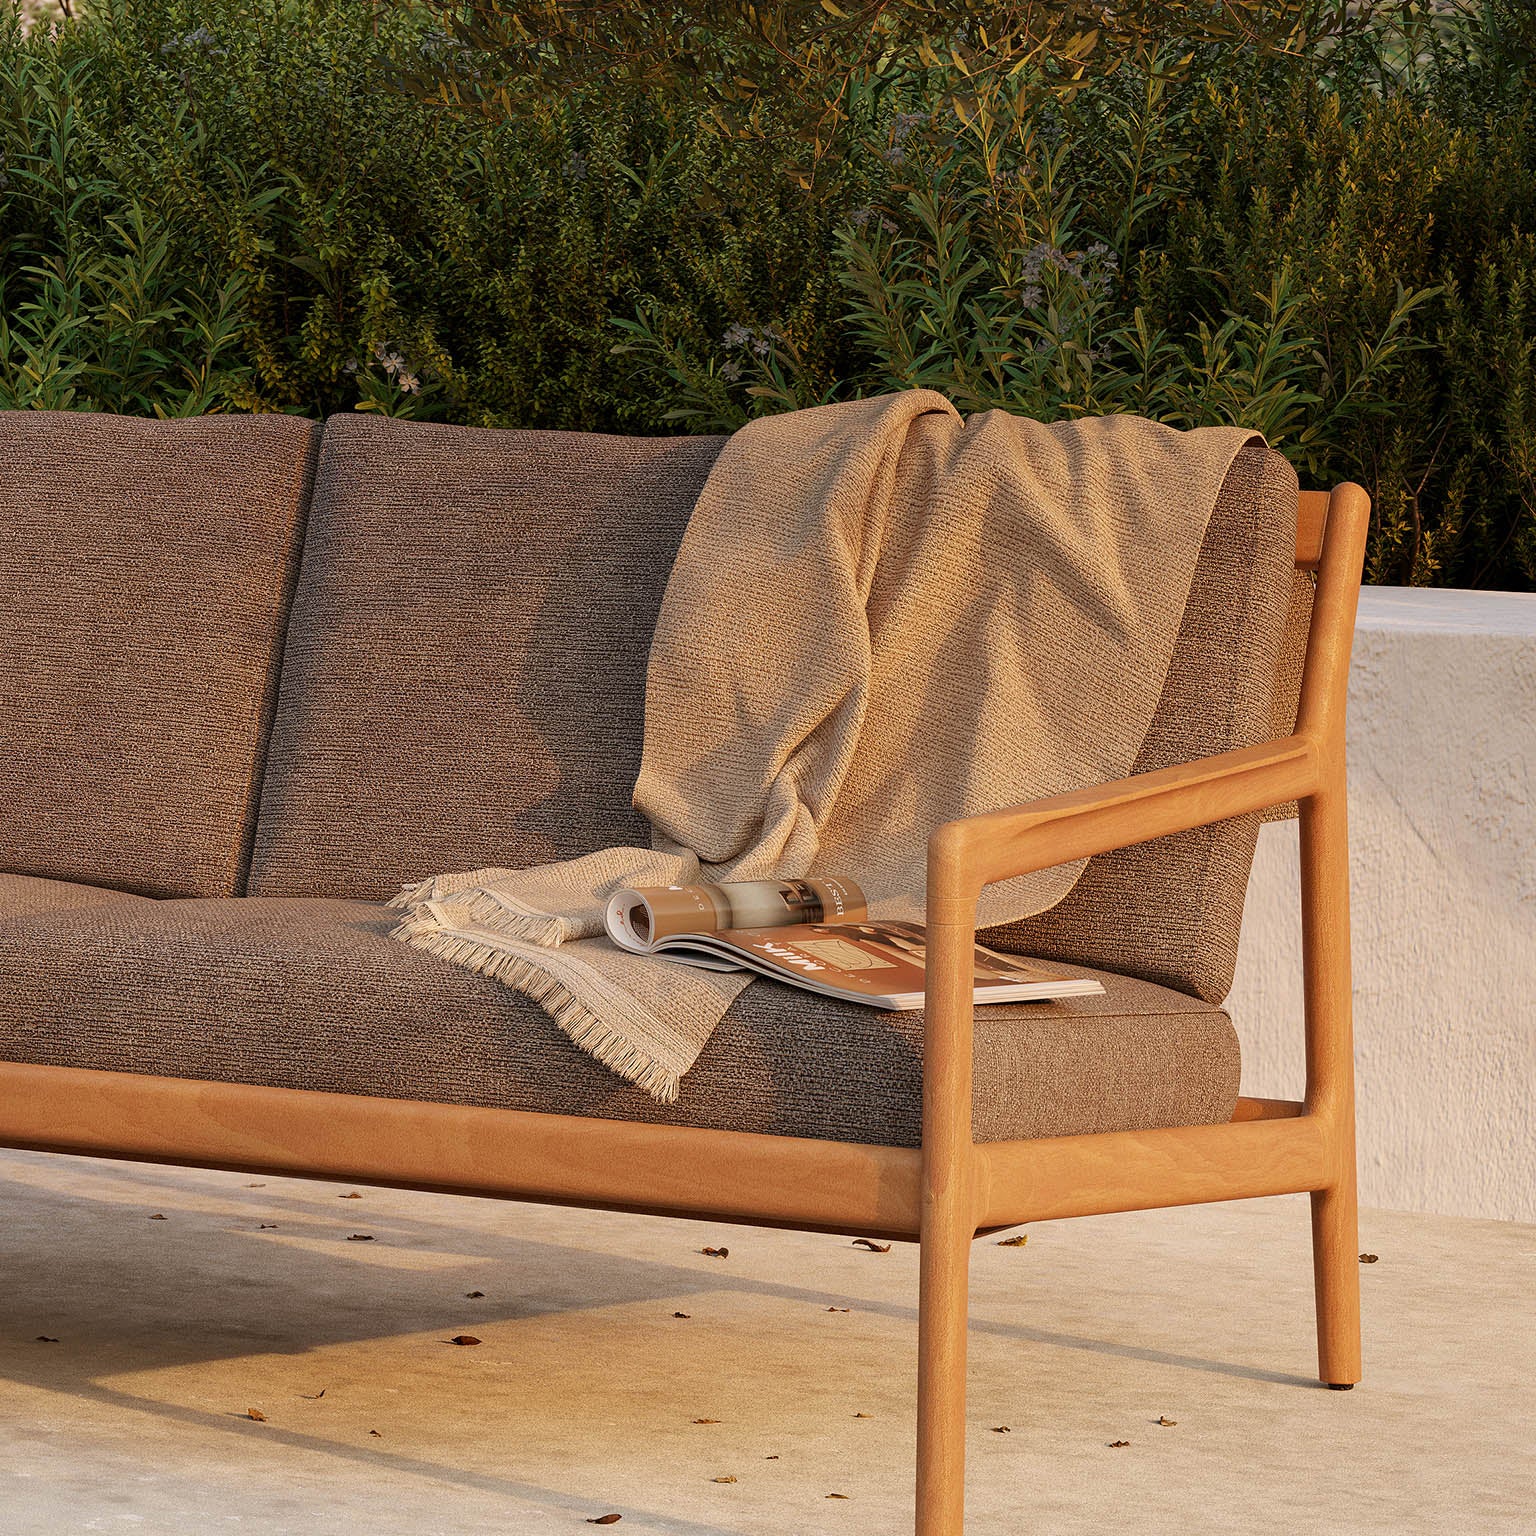 Beautiful from every angle, luxuriant shapes and curves form the basis of the Jack sofa collection from Ethnicraft. Featuring upholstery woven in Belgium, every detail has been meticulously crafted to ensure comfort and elegance when enjoying the outdoors. Apart of Ethnicraft's first outdoor collection. Designed by Jacques Deneef.